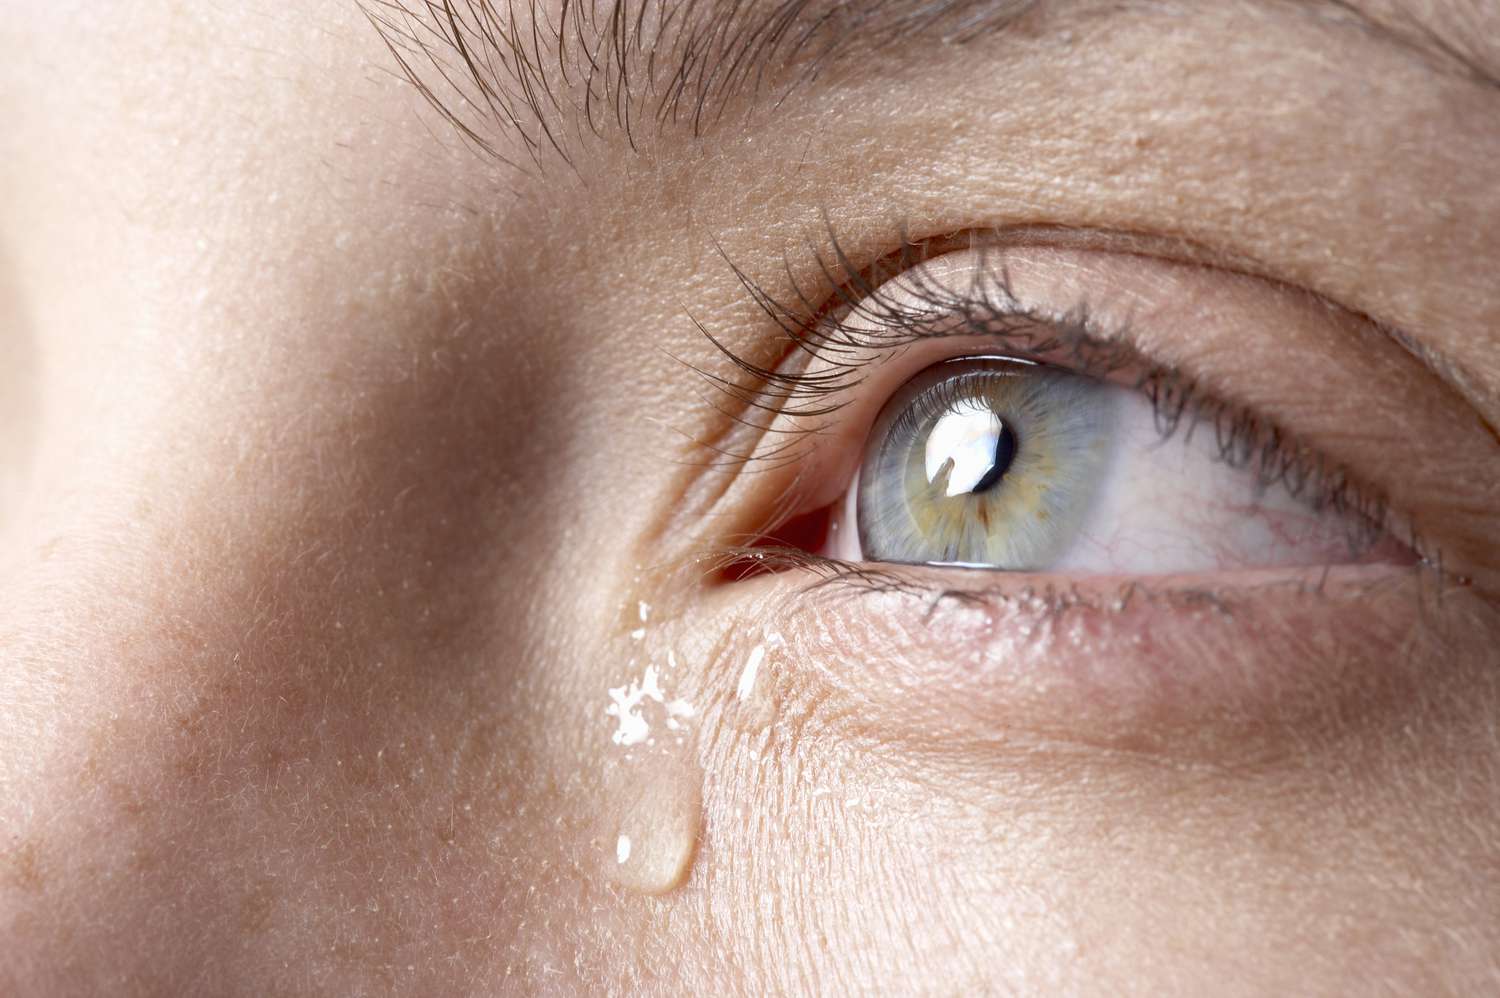 Women’s Tears: A Natural Elixir in Reducing Aggression